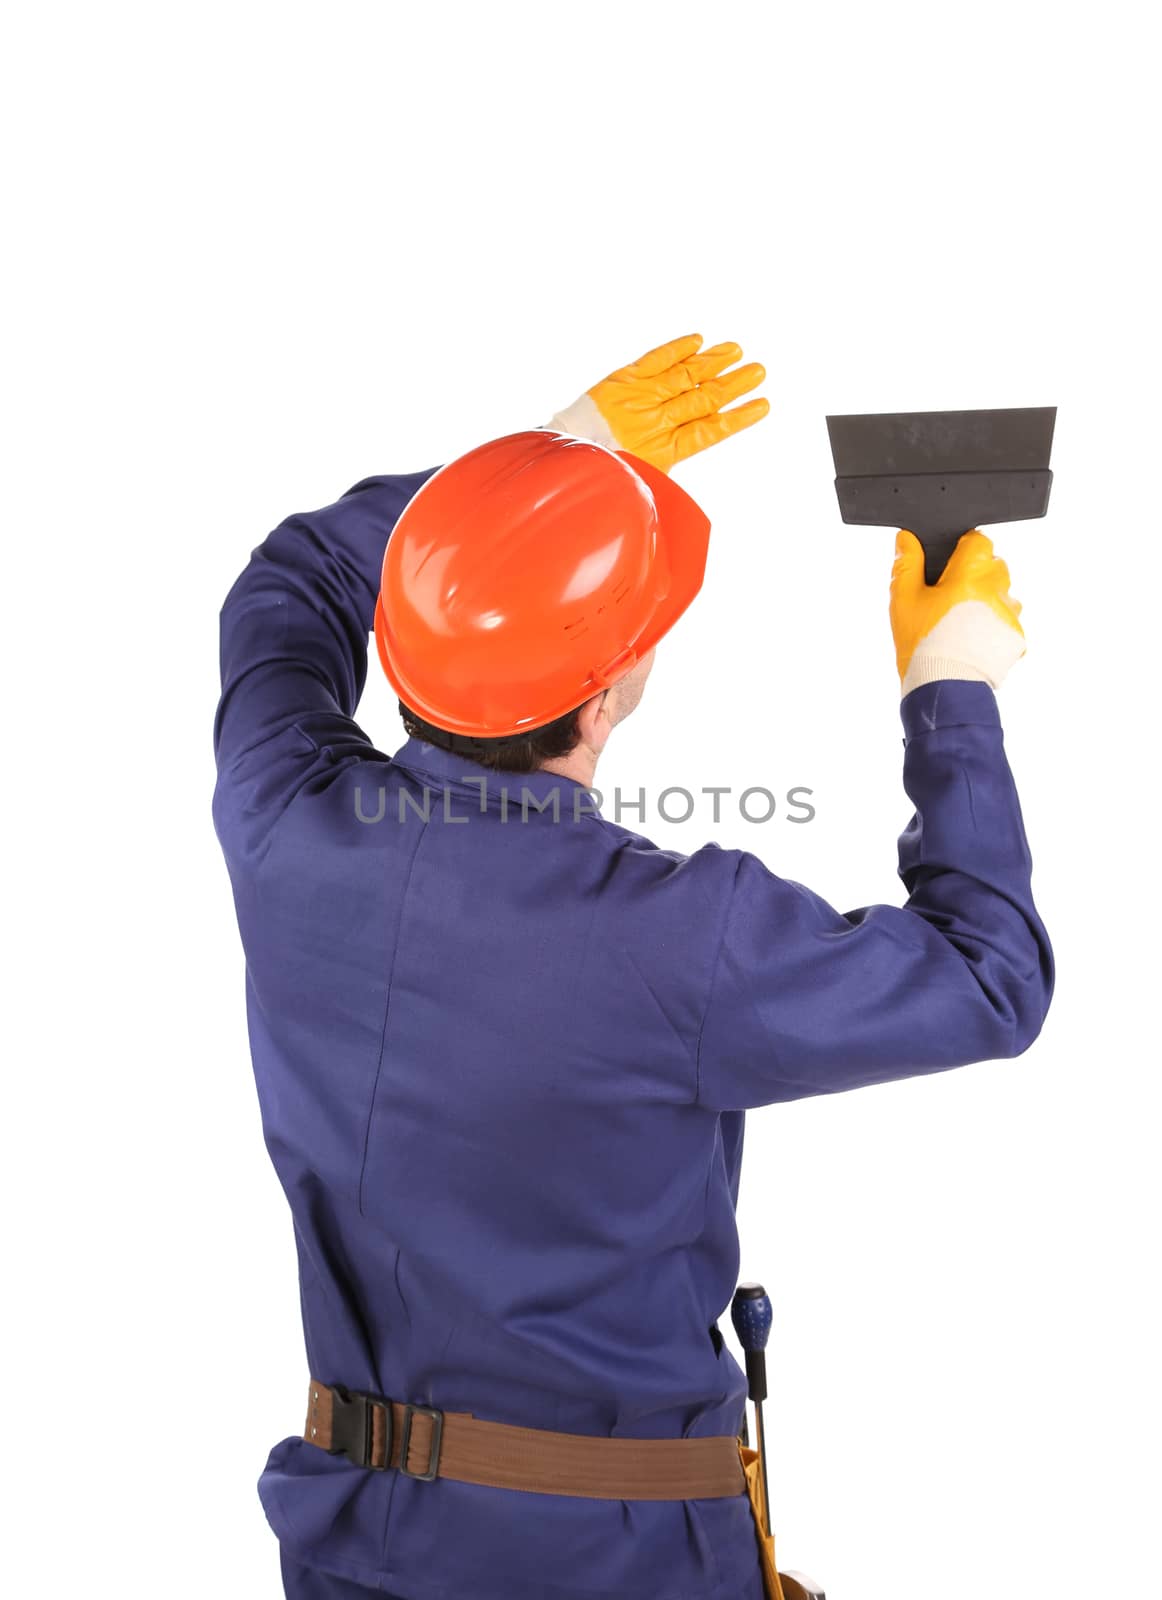 Man working with spatula. Isolated on a white background.